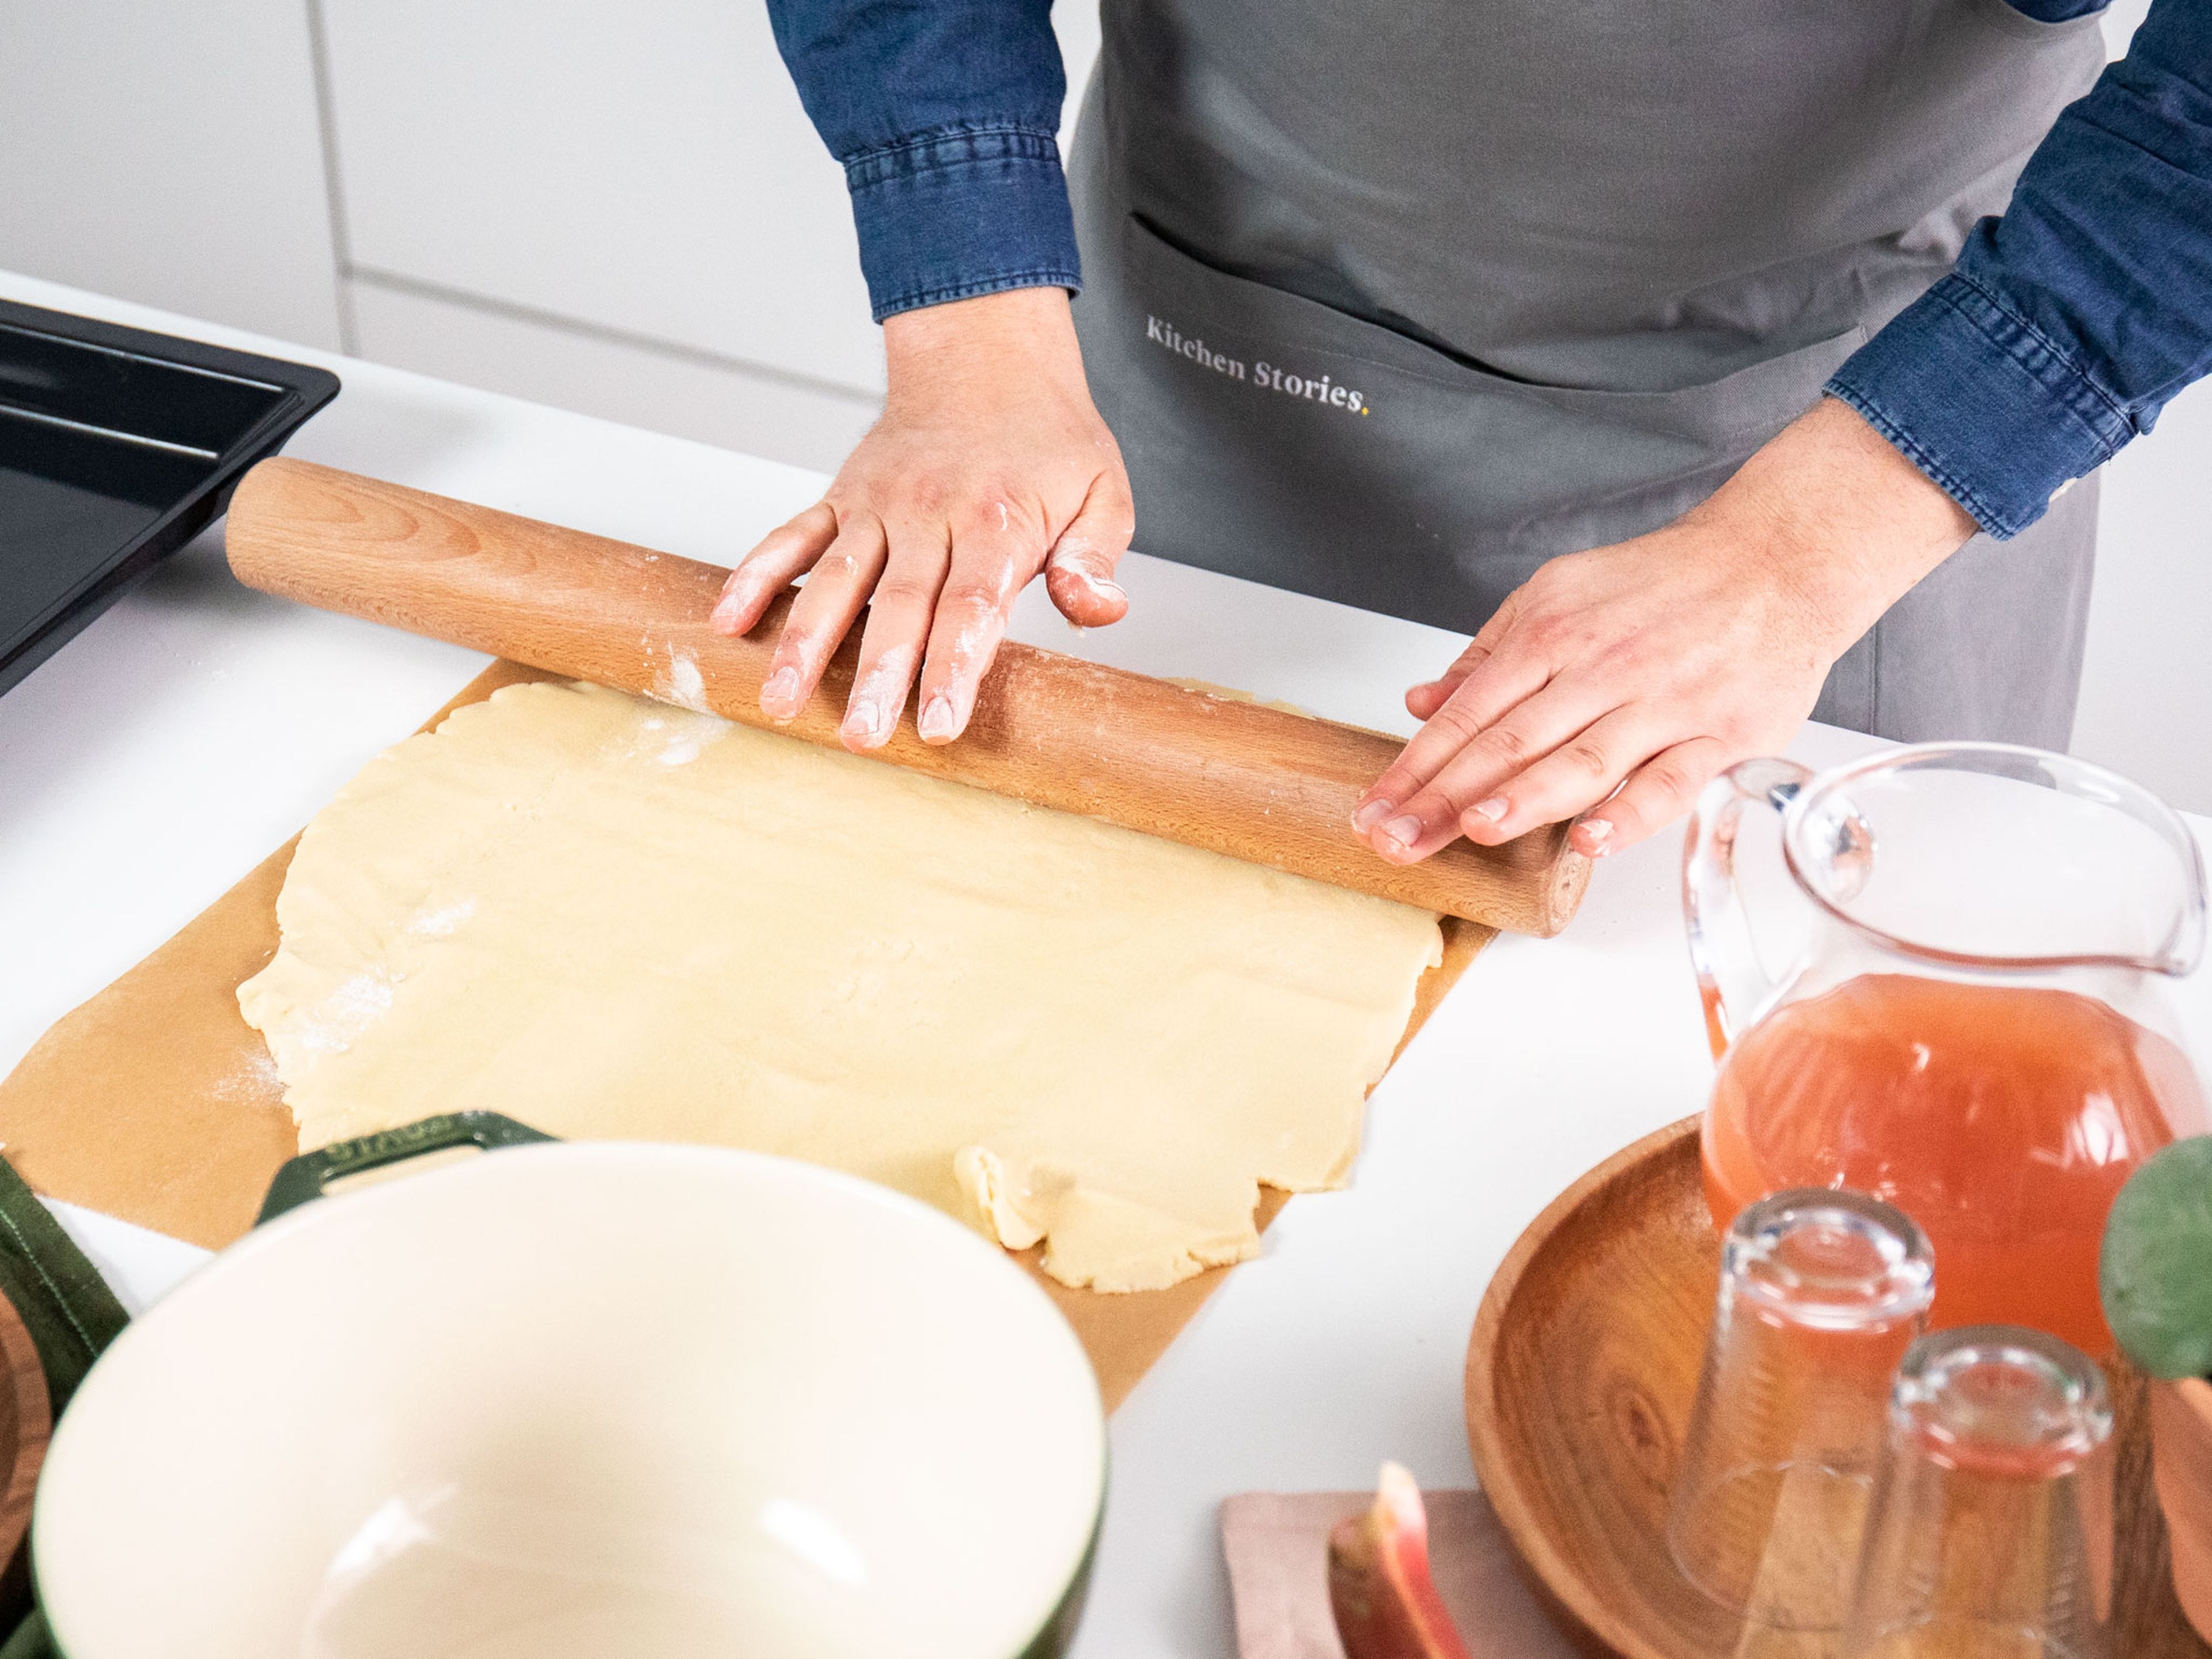 Halve the dough and let one half rest in the fridge. Roll out the second half of the dough between two sheets of parchment paper, until it’s the same size as your baking sheet, then transfer the dough to it.